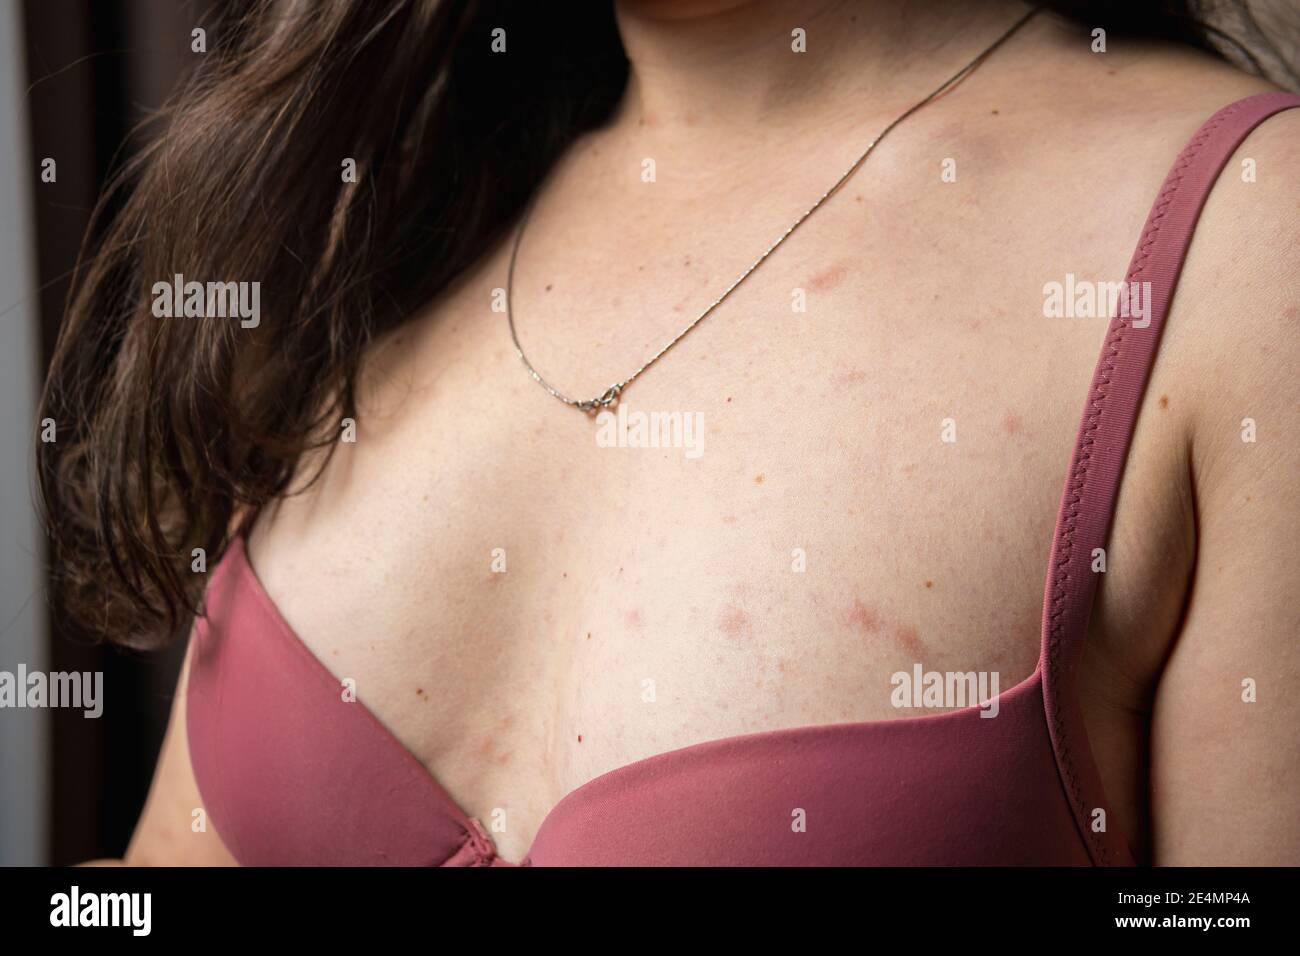 https://c8.alamy.com/comp/2E4MP4A/women-with-symptoms-of-itchy-urticaria-or-allergic-reaction-on-the-skin-red-rash-on-the-females-body-concepts-of-allergy-skin-diseases-and-health-c-2E4MP4A.jpg